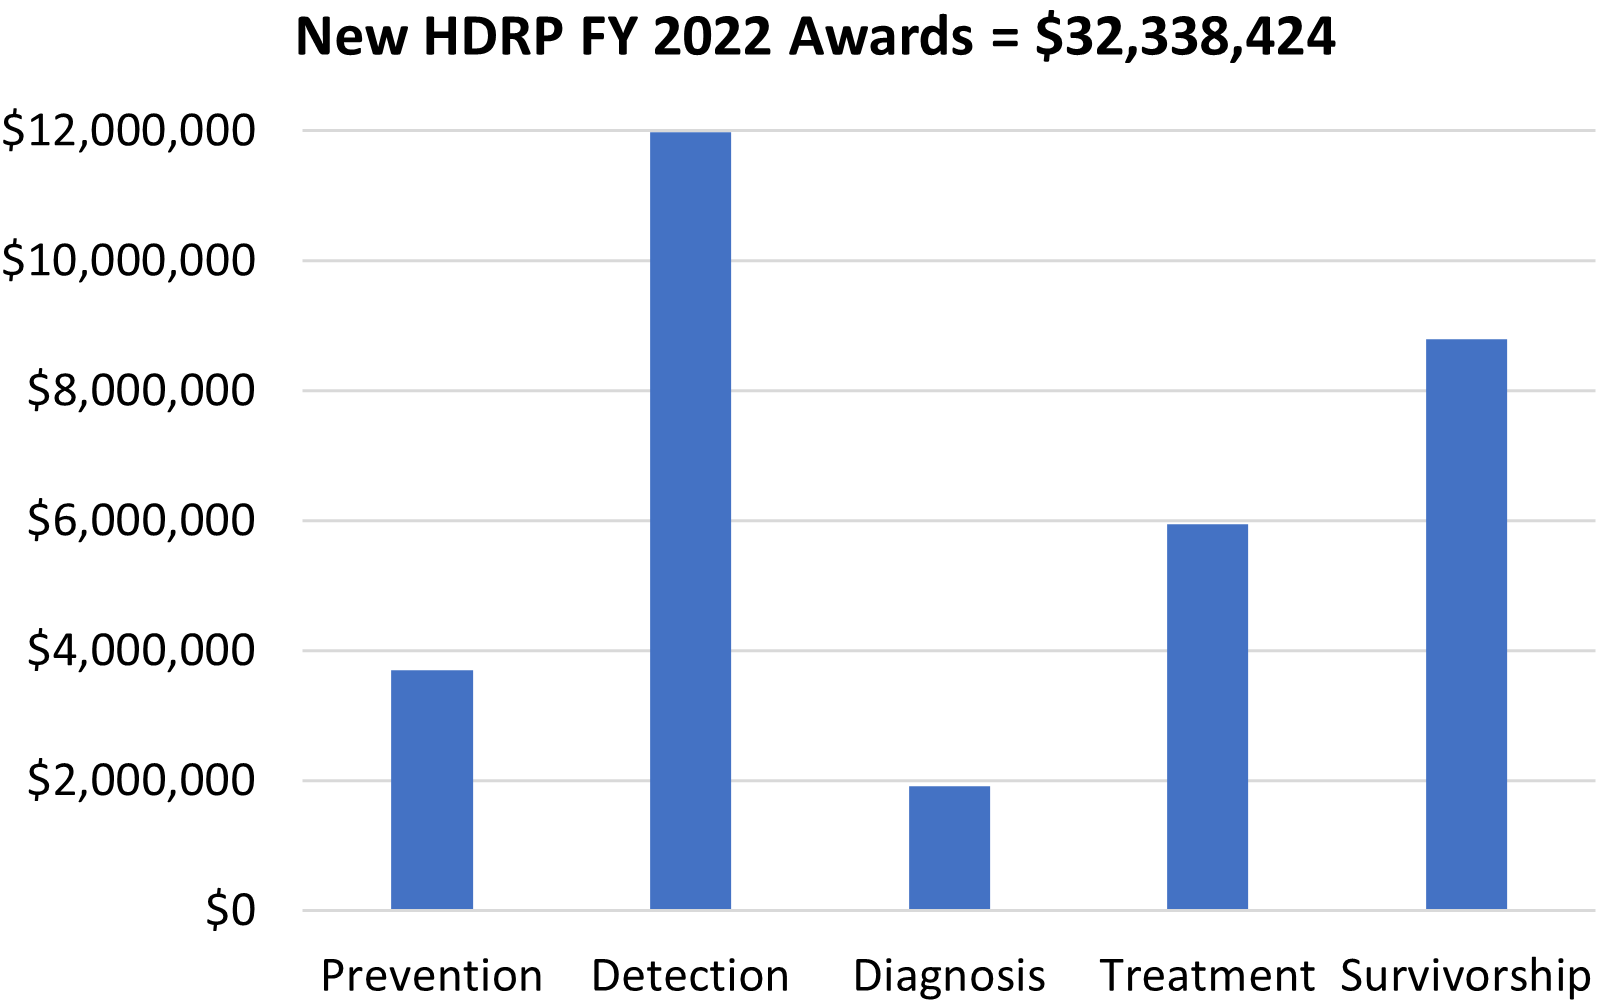 New HDRP 2022 awards: Prevention - almost $4 million, Detection - $12 million, Diagnosis - almost $2 million, Treatment - almost $6 million, Survivorship - almost $9 million. $32338424 total.